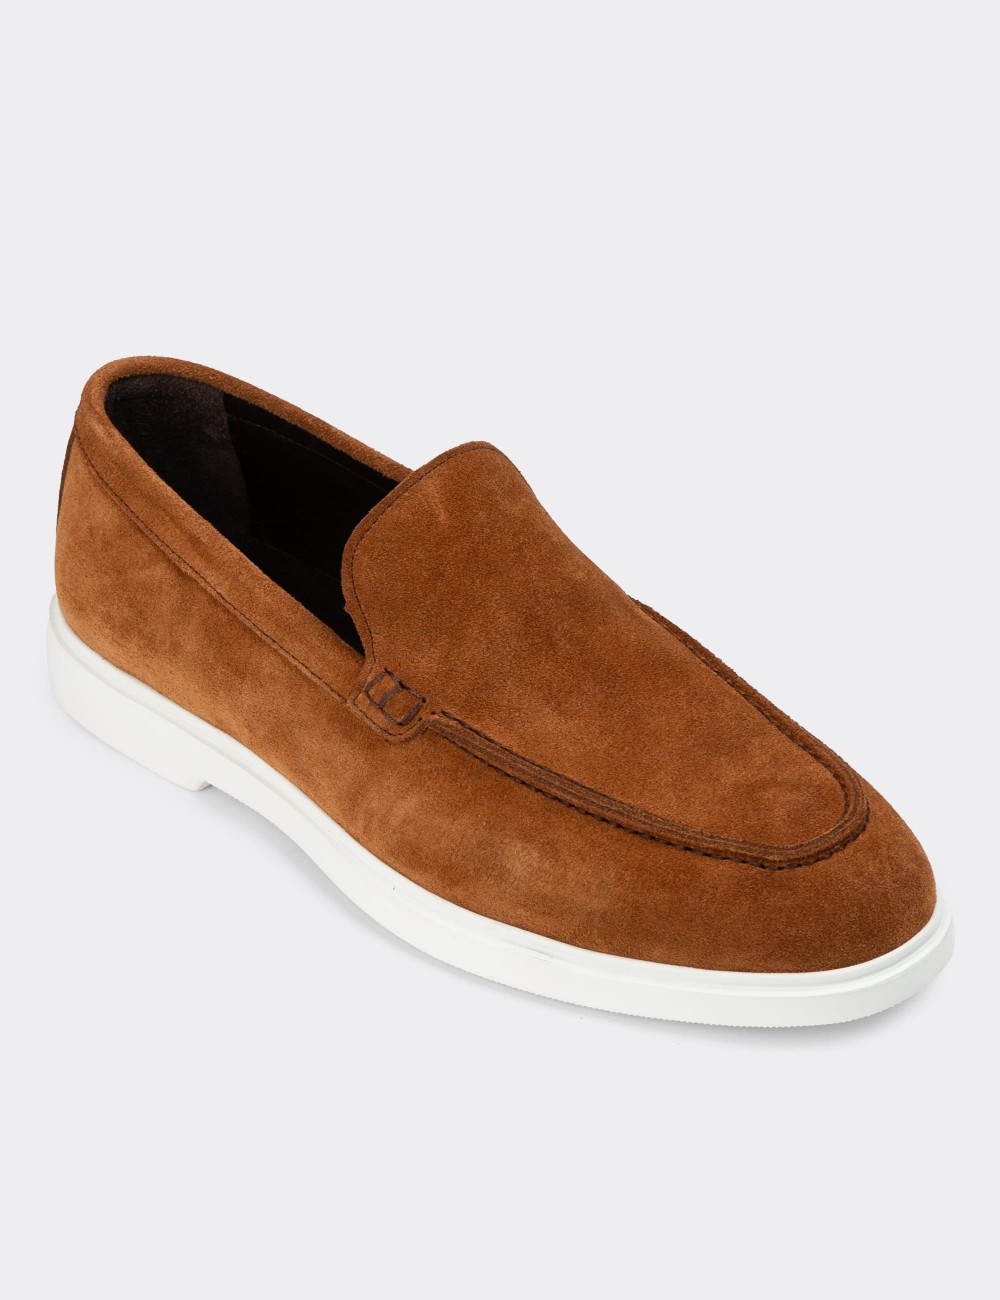 Tan Suede Leather Loafers - 01957MTBAE01